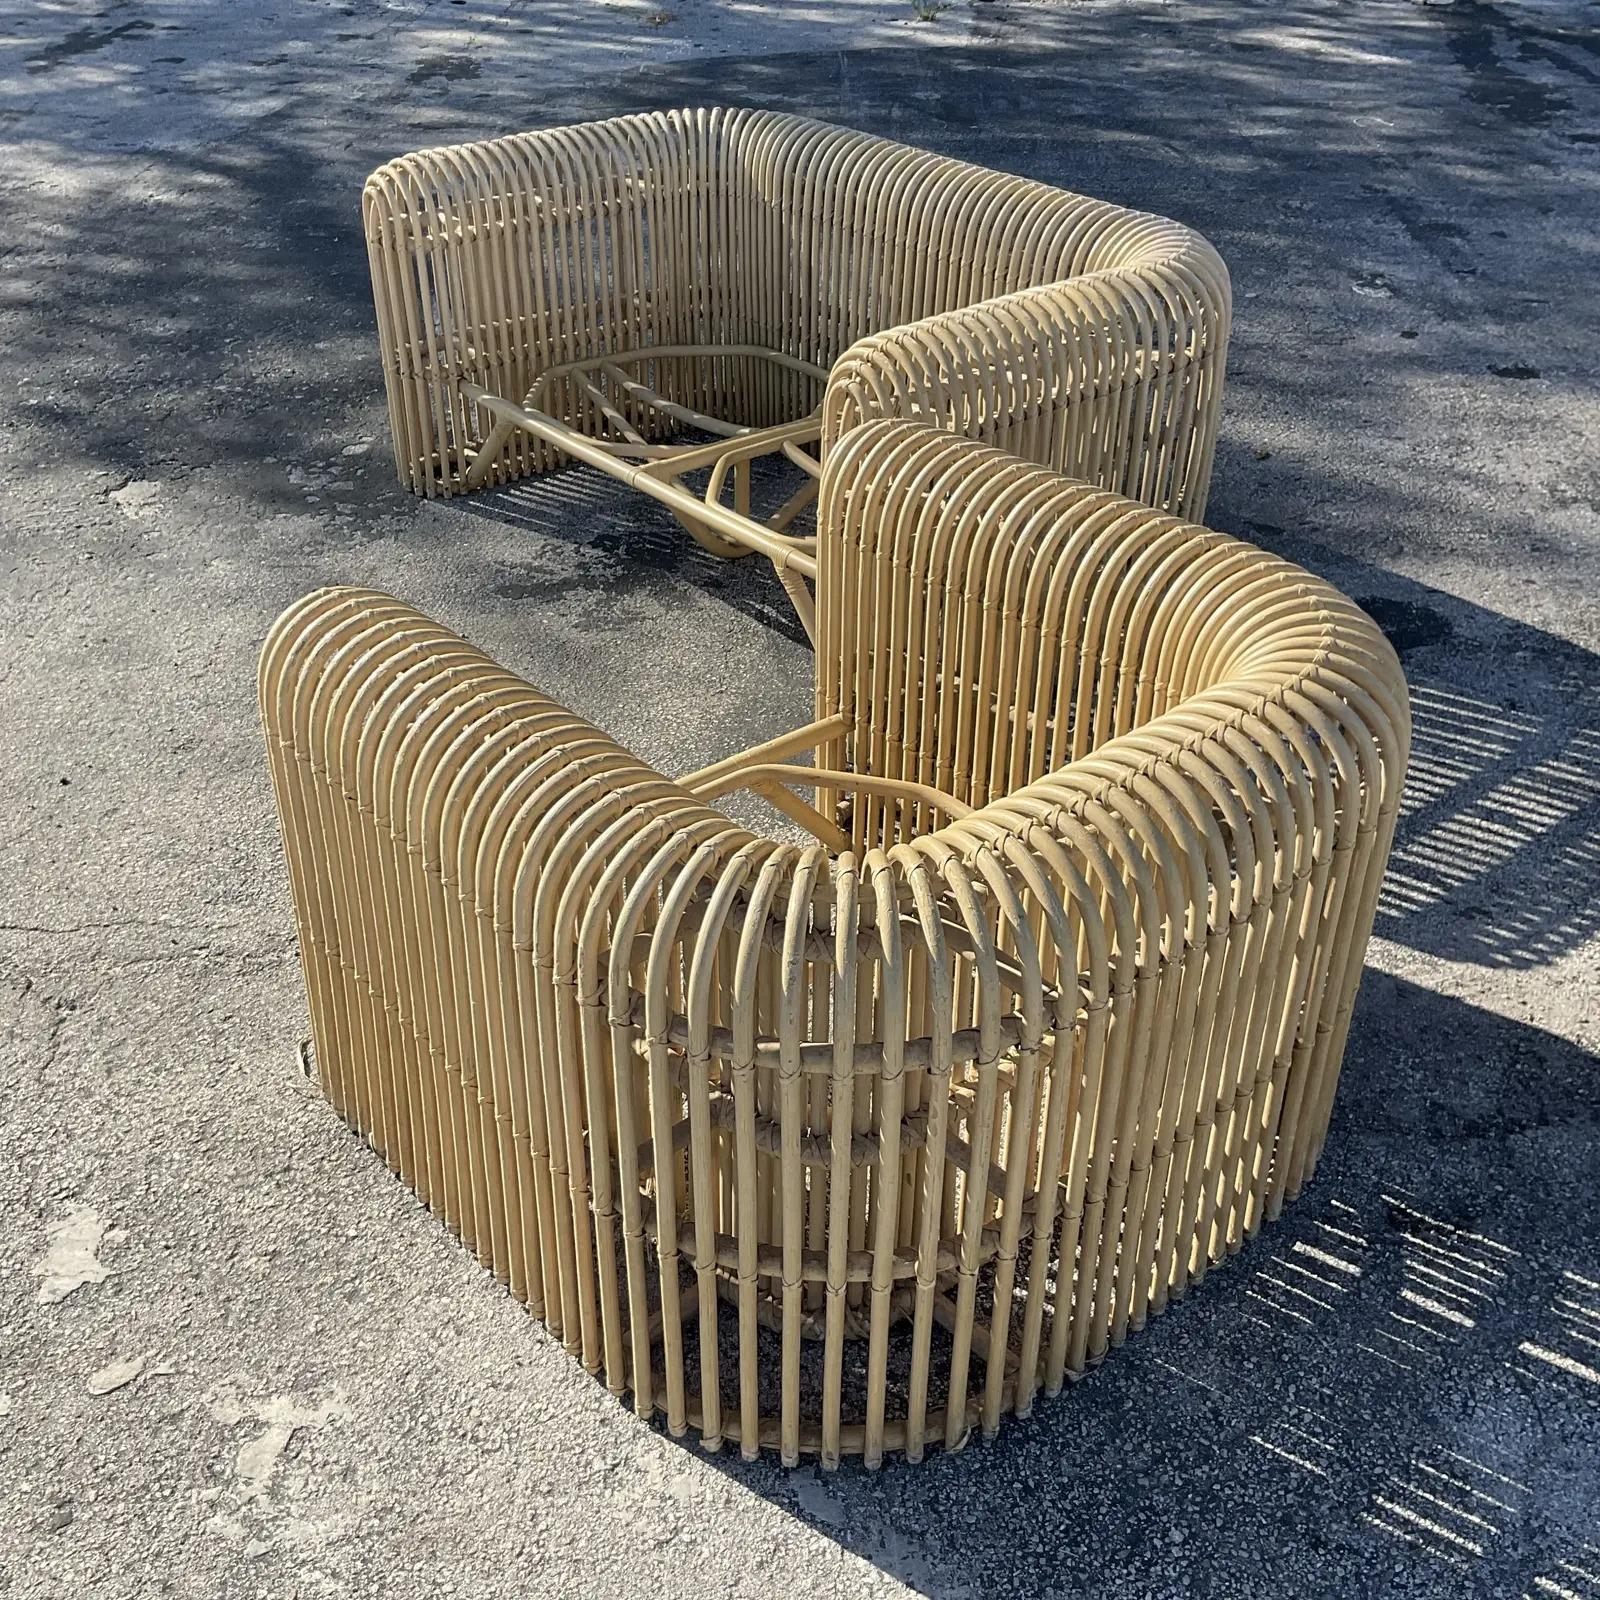 An exceptional set of vintage Coastal loveseat and chair. Chic rubber rattan in an iconic waterfall design. Done in the manner of a Henry Olko. Acquired from a Palm Beach estate.

Chair dimensions 40 x 26 x 27

The seats are in great vintage